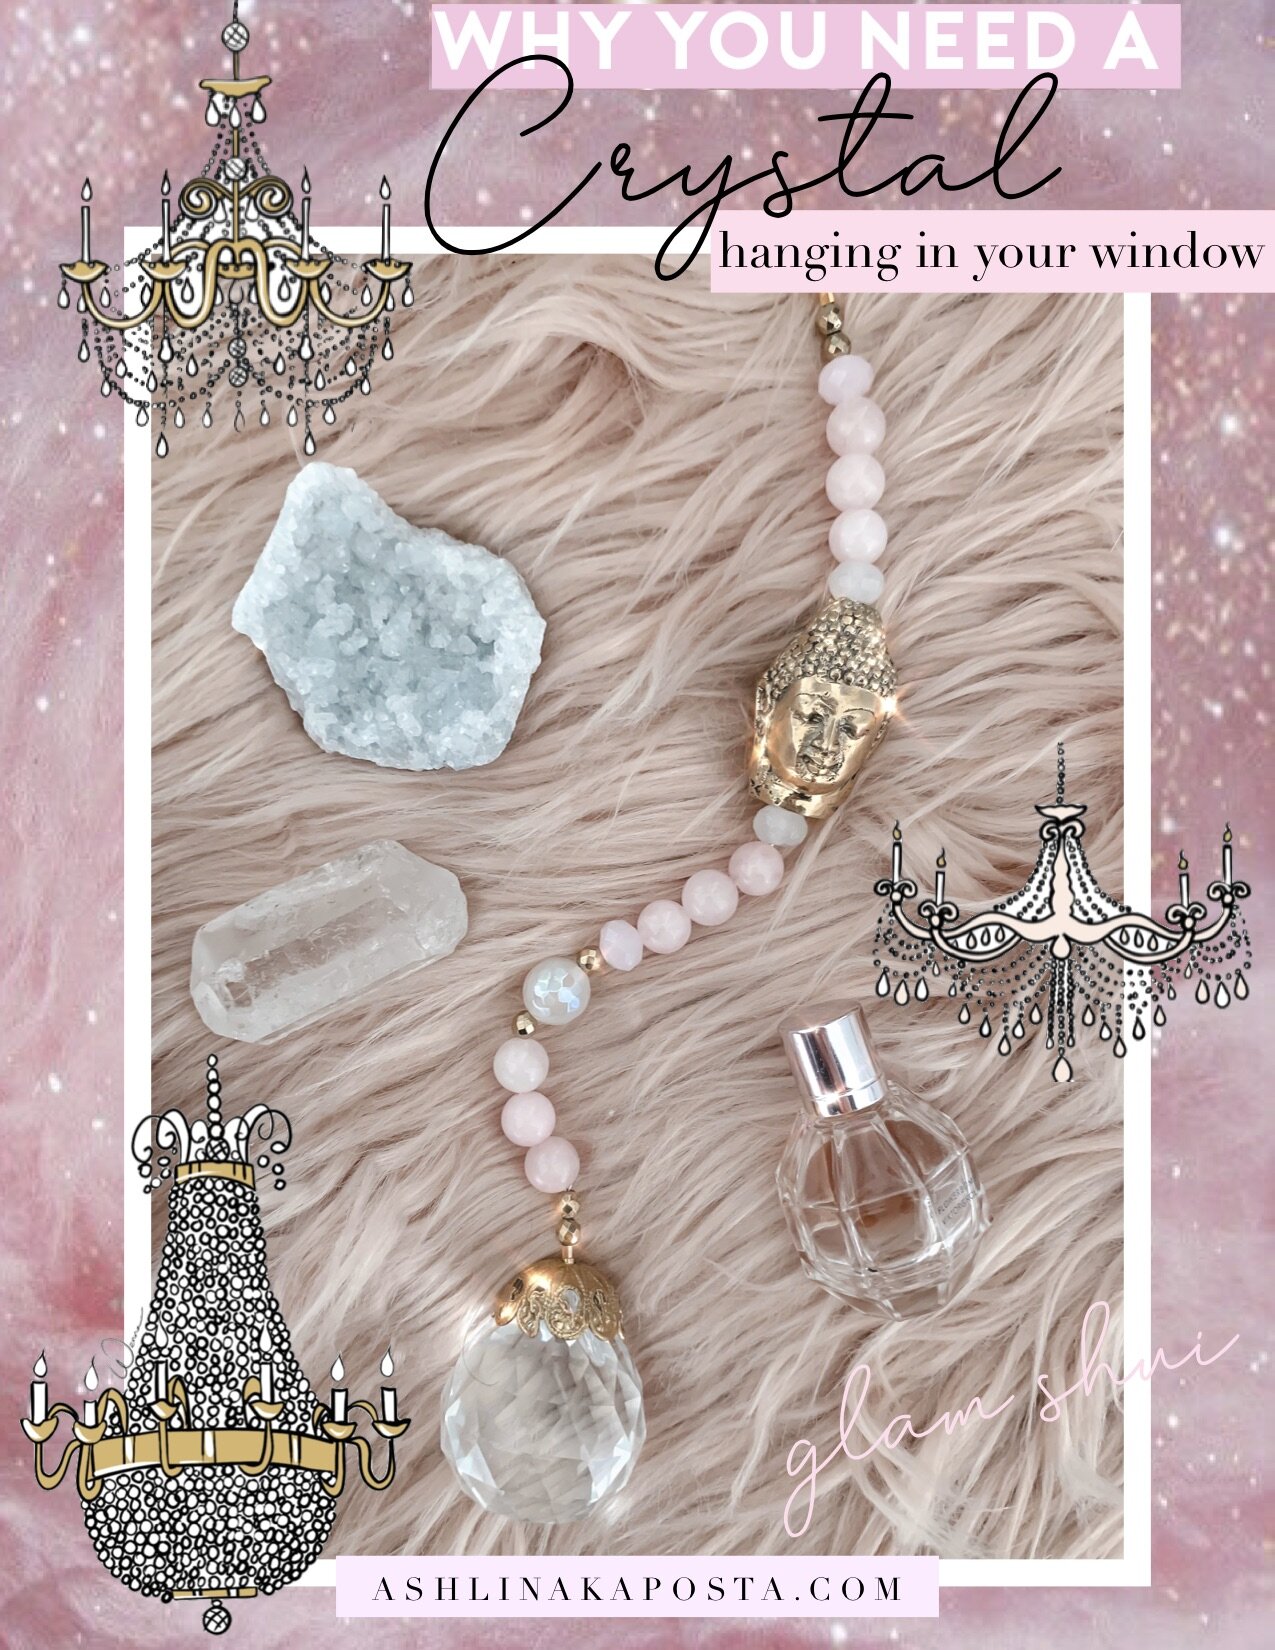 Hanging Crystals in Windows for Positive Feng Shui Energy